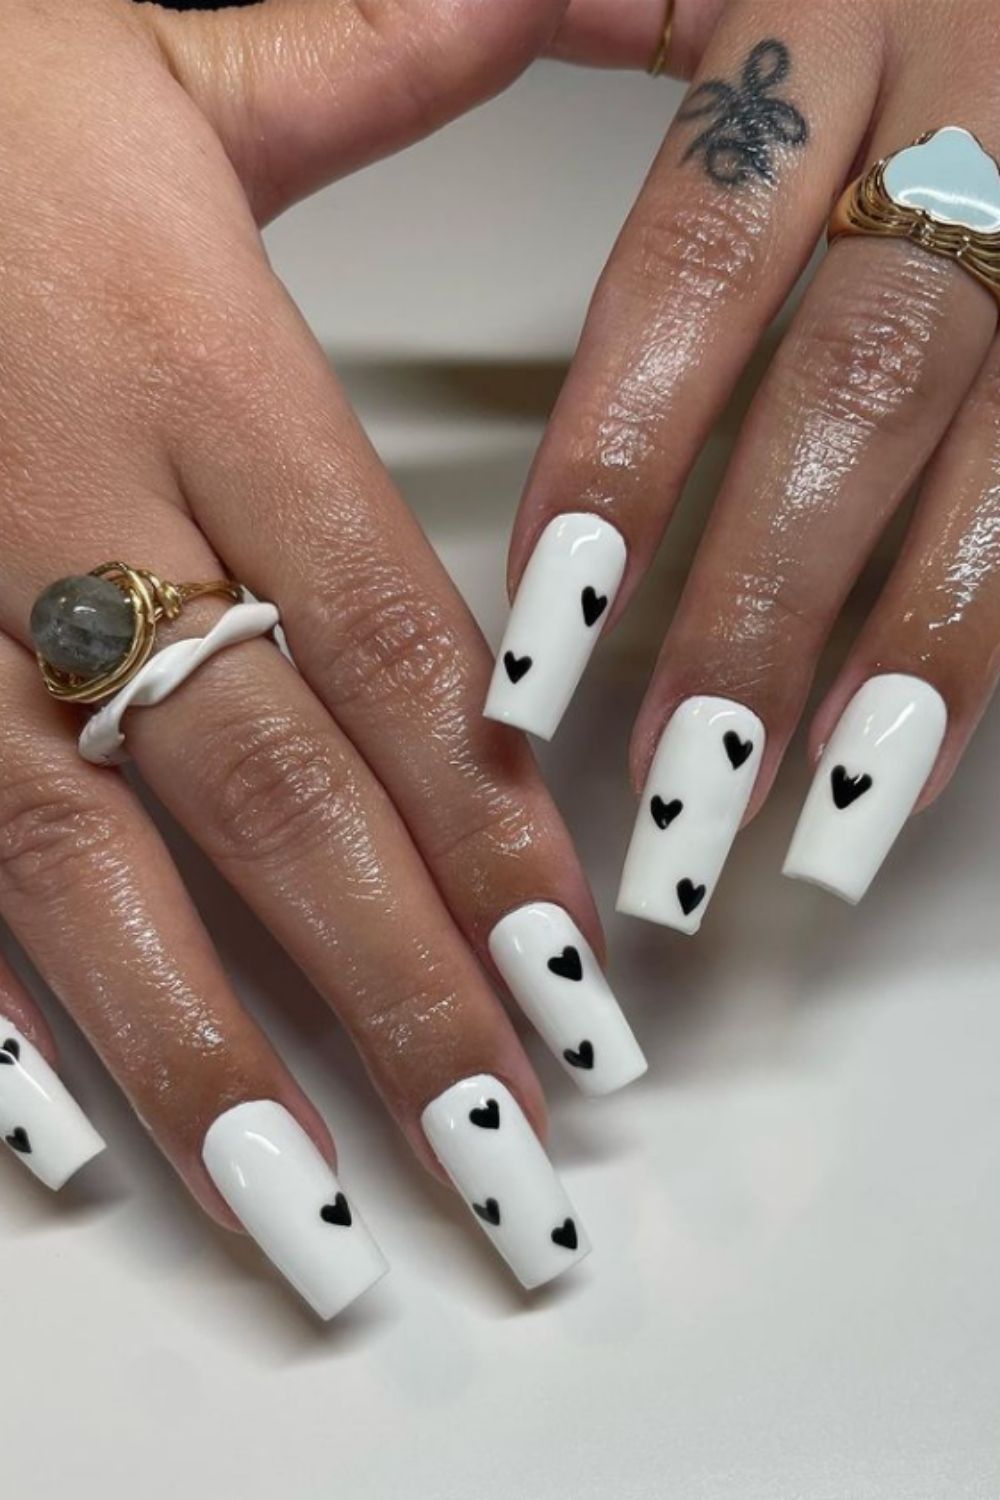 White coffin nails ideas with black small heart